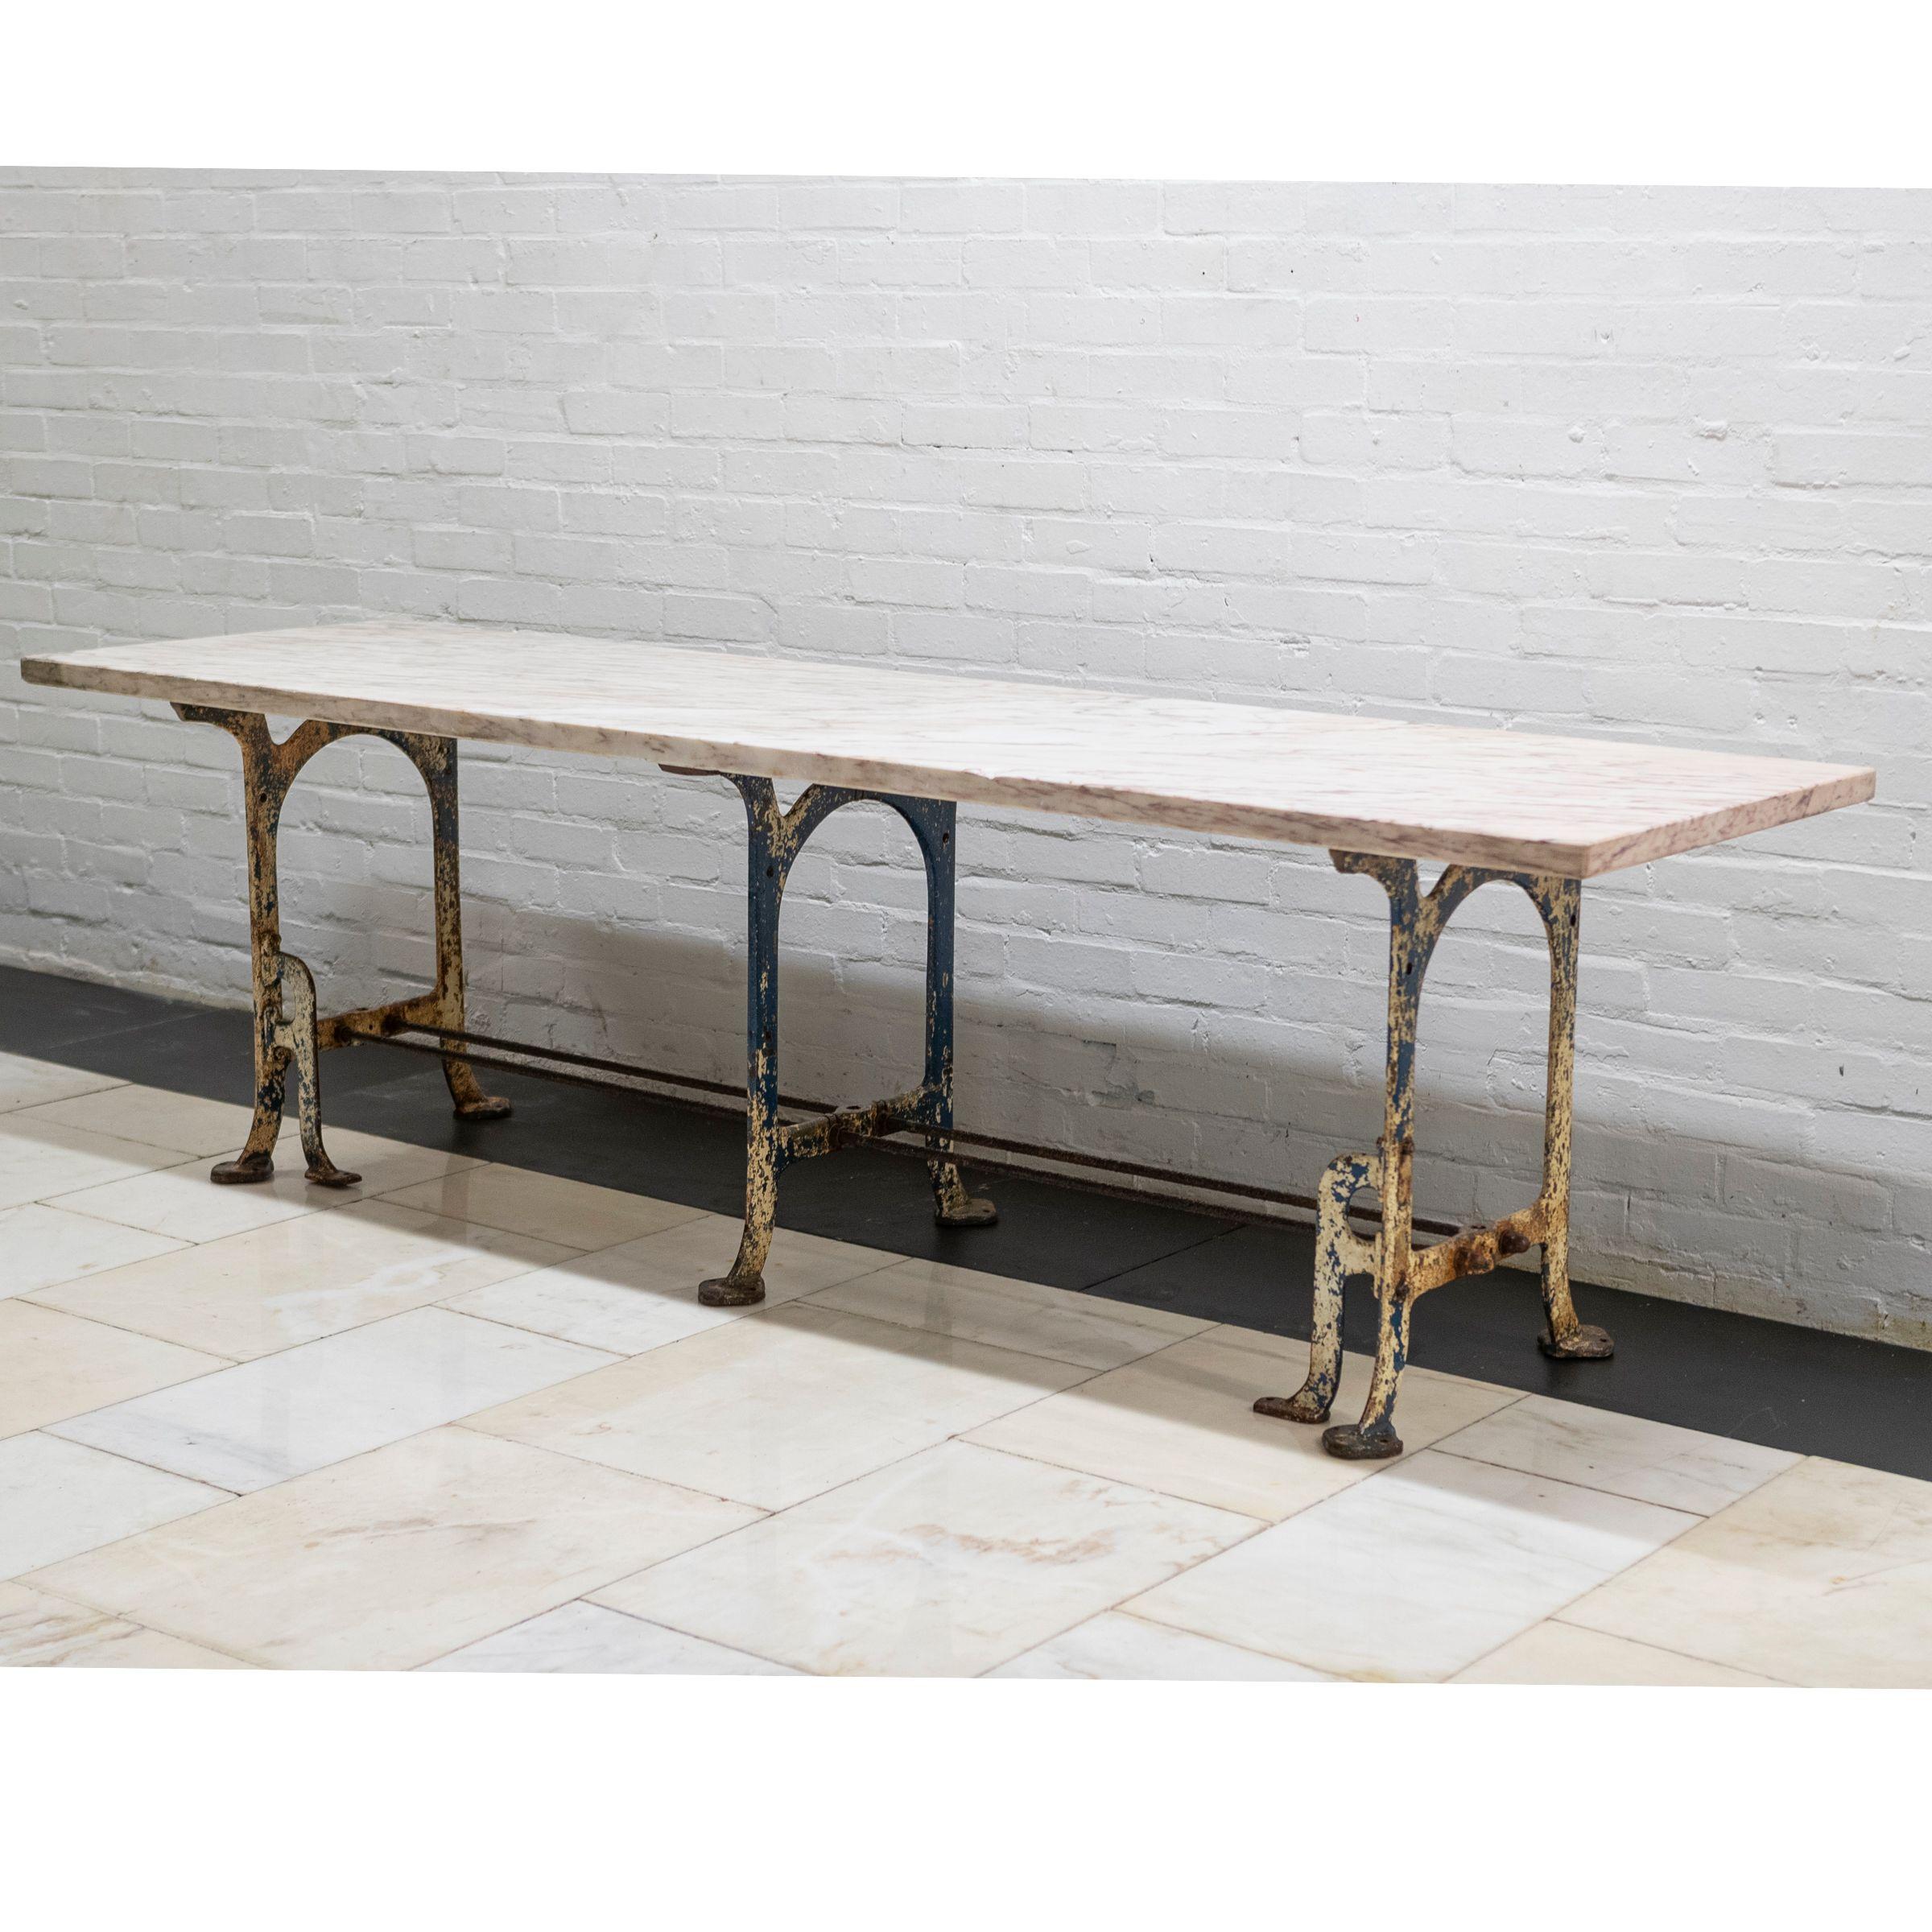 Industrial Long Breche Rose Marble Top Table on Cast Iron Legs